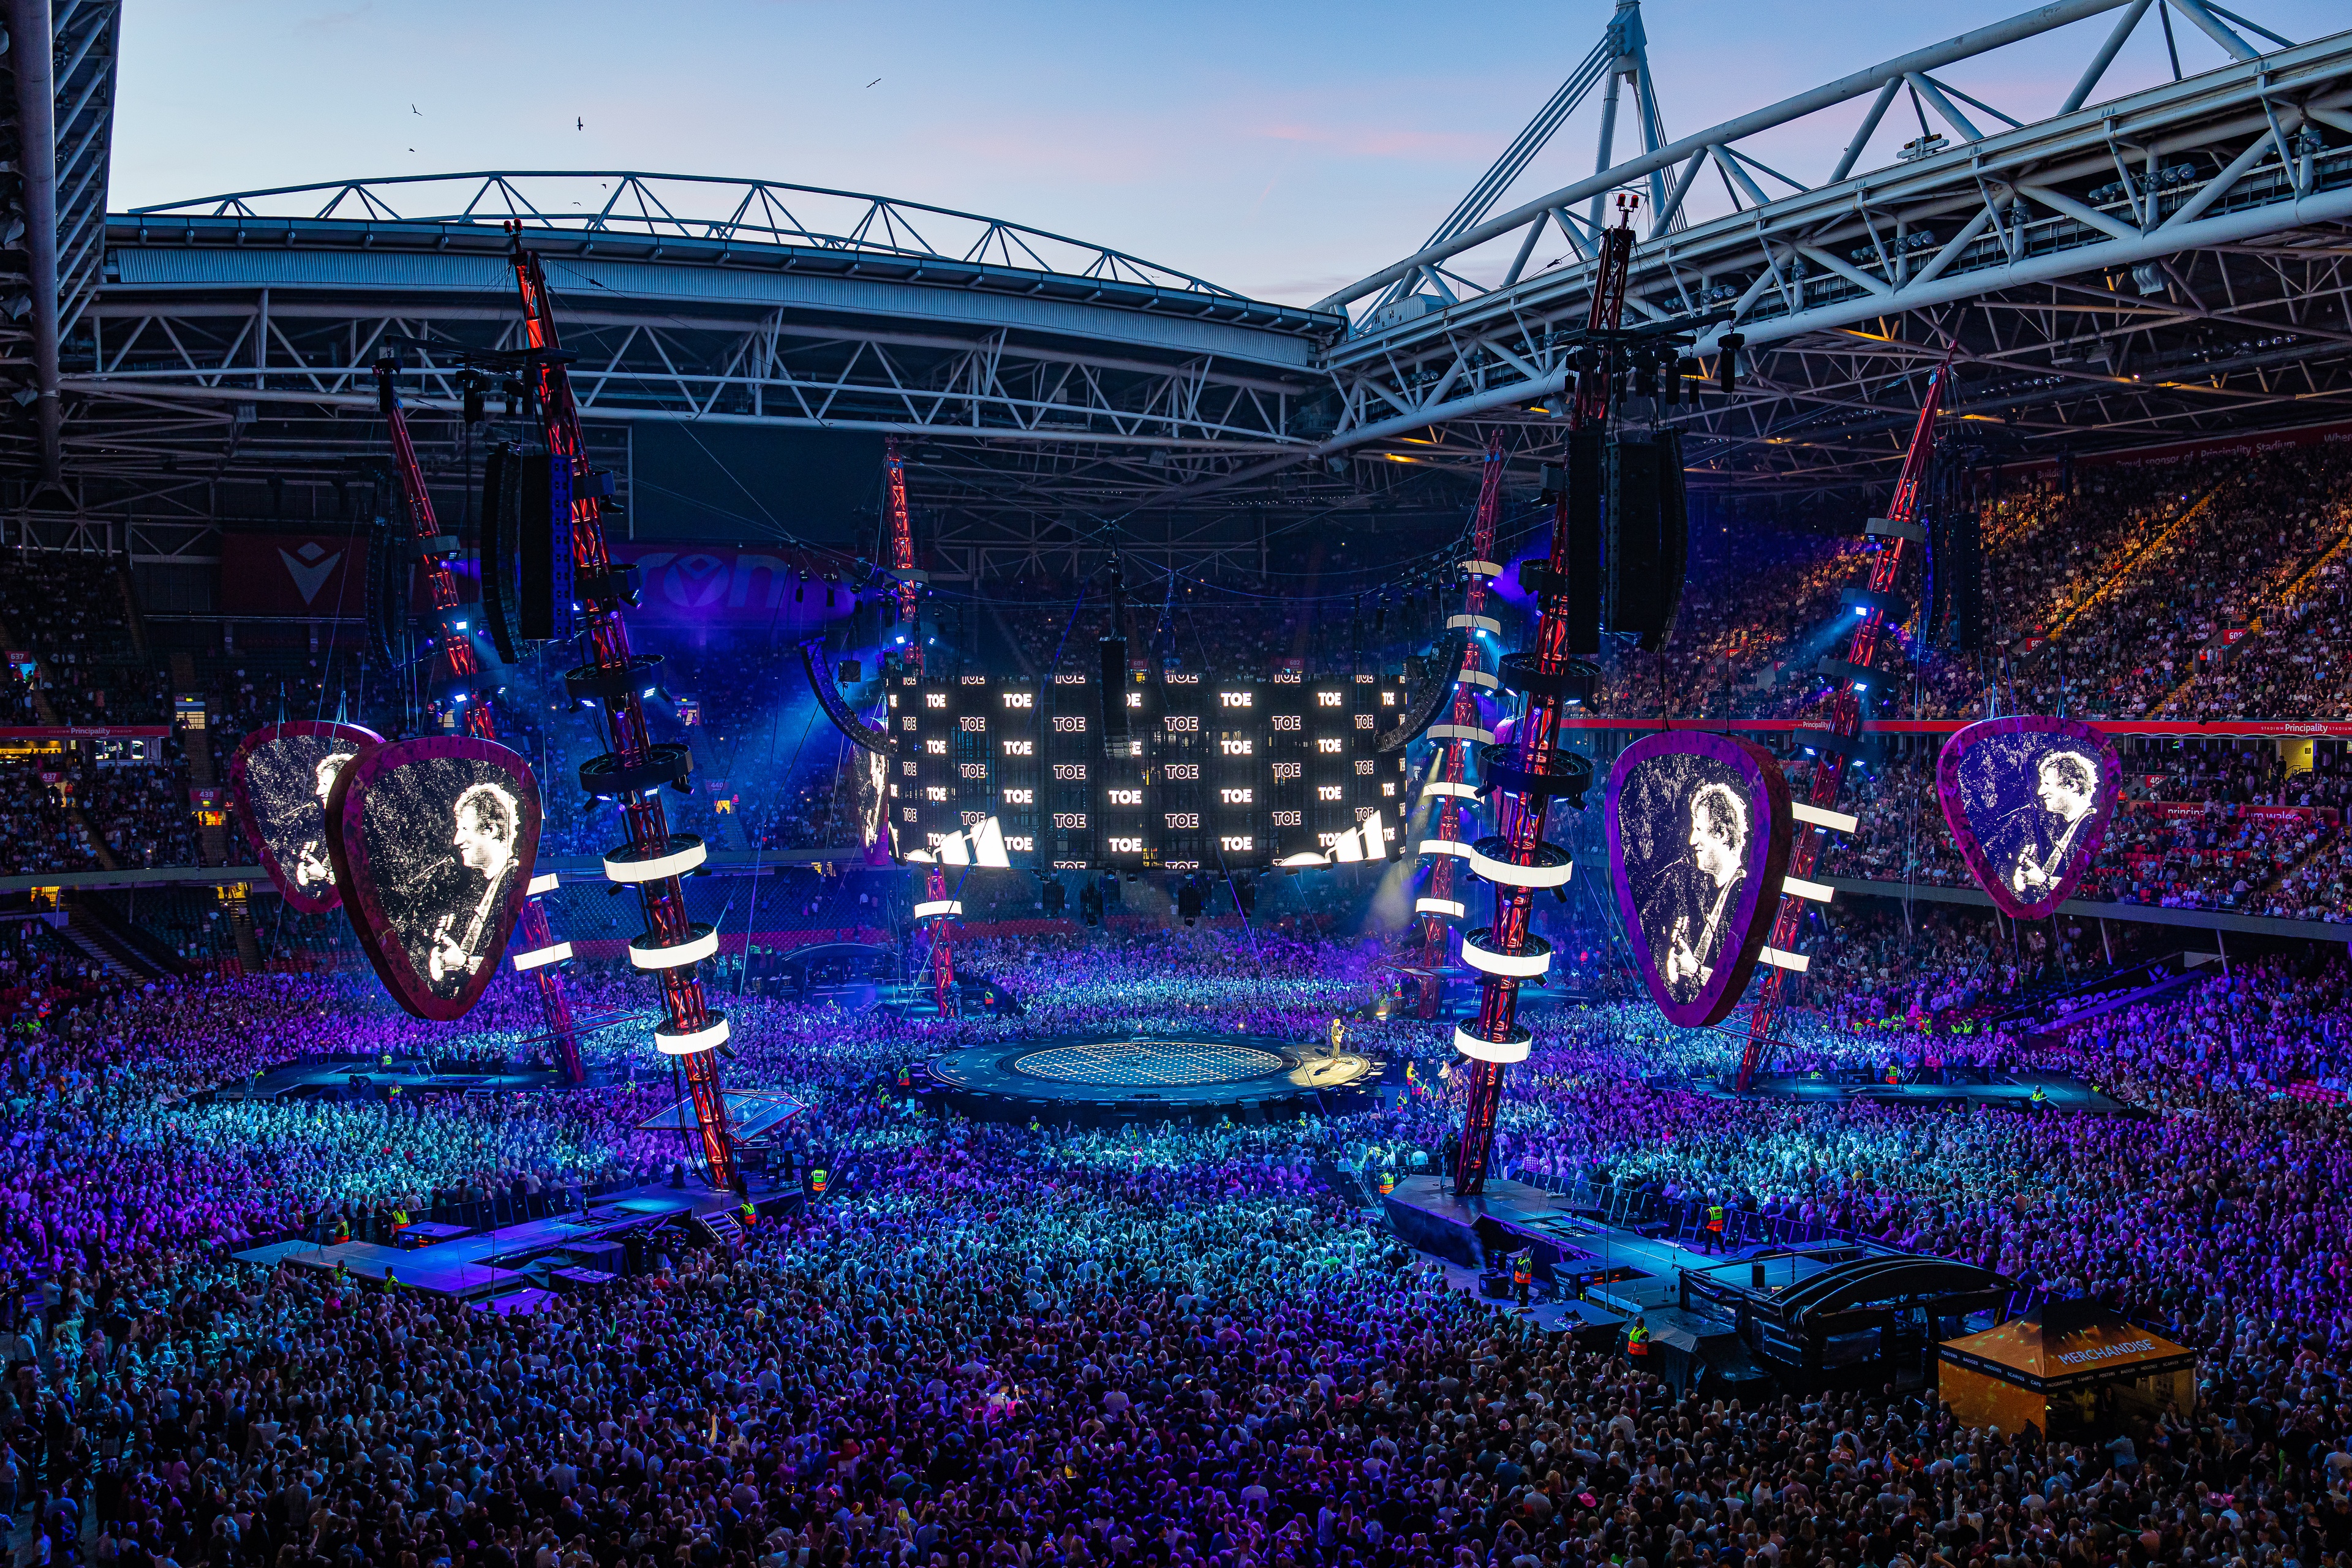 Ed Sheeran Mathematics stage lit up blue and purple surrounded by large stadium crowd